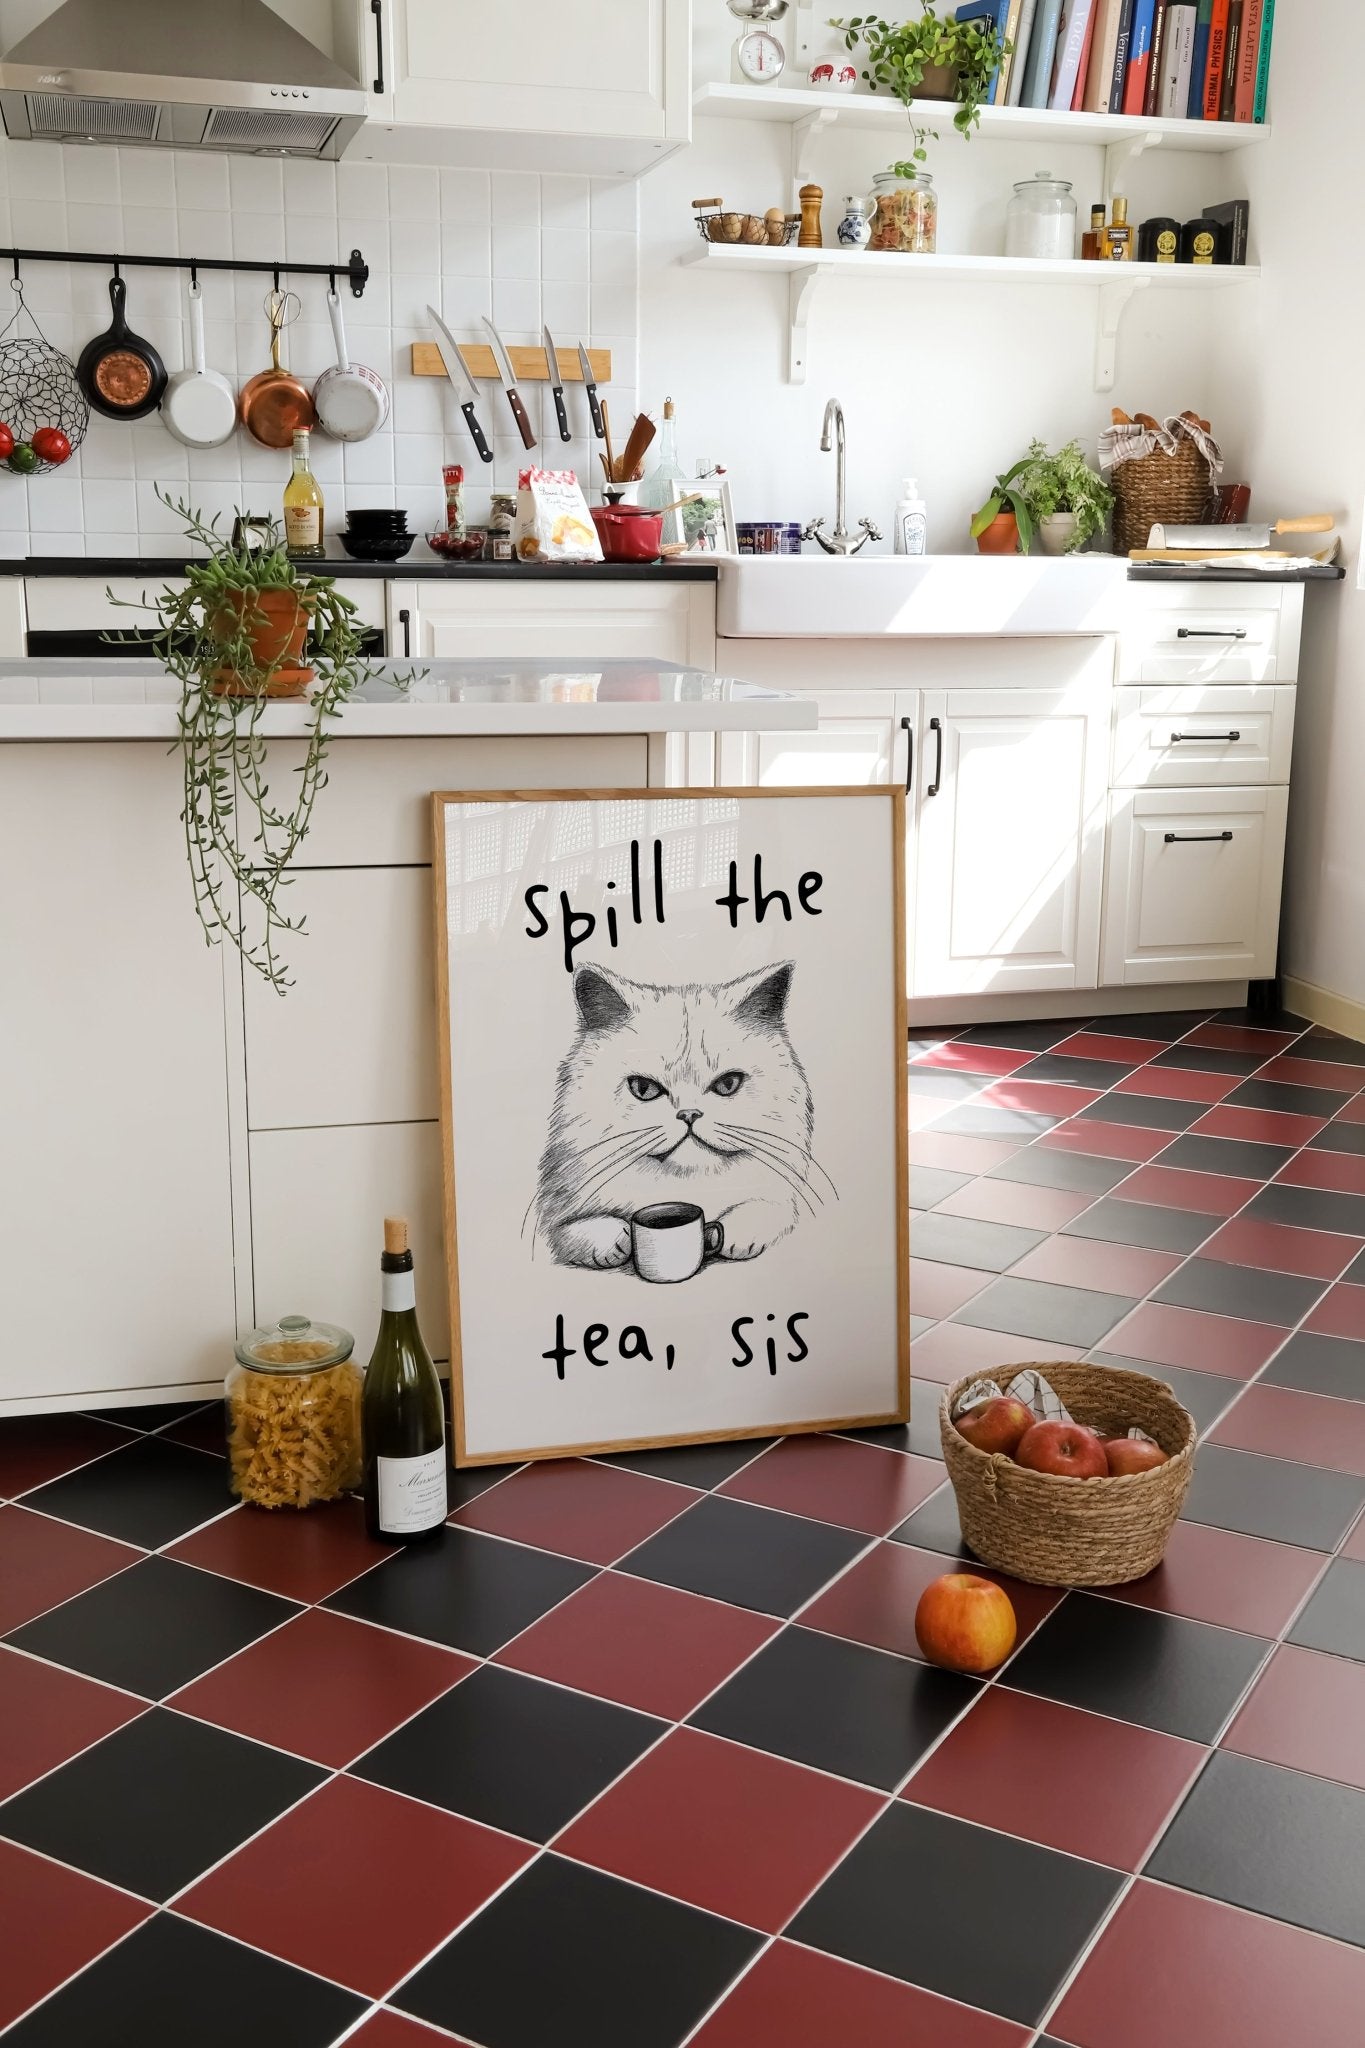 Spill the Tea Sis Print Funny Kitchen Sign